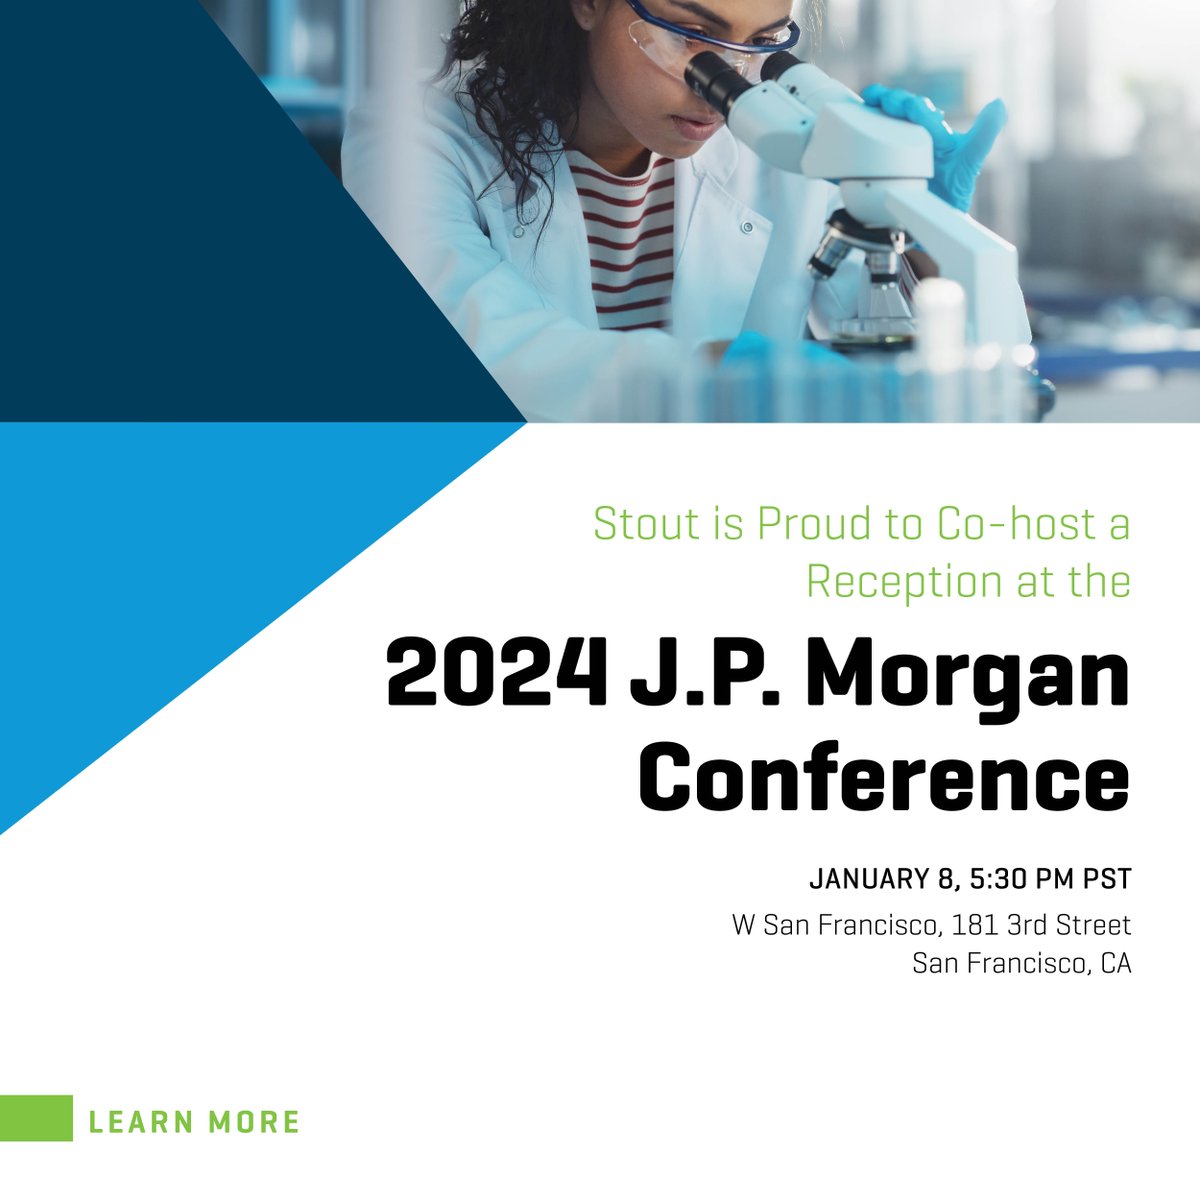 Join Stout for an exclusive networking reception at the 2024 J.P. Morgan Conference. Secure your spot here: bit.ly/3GYCdLO